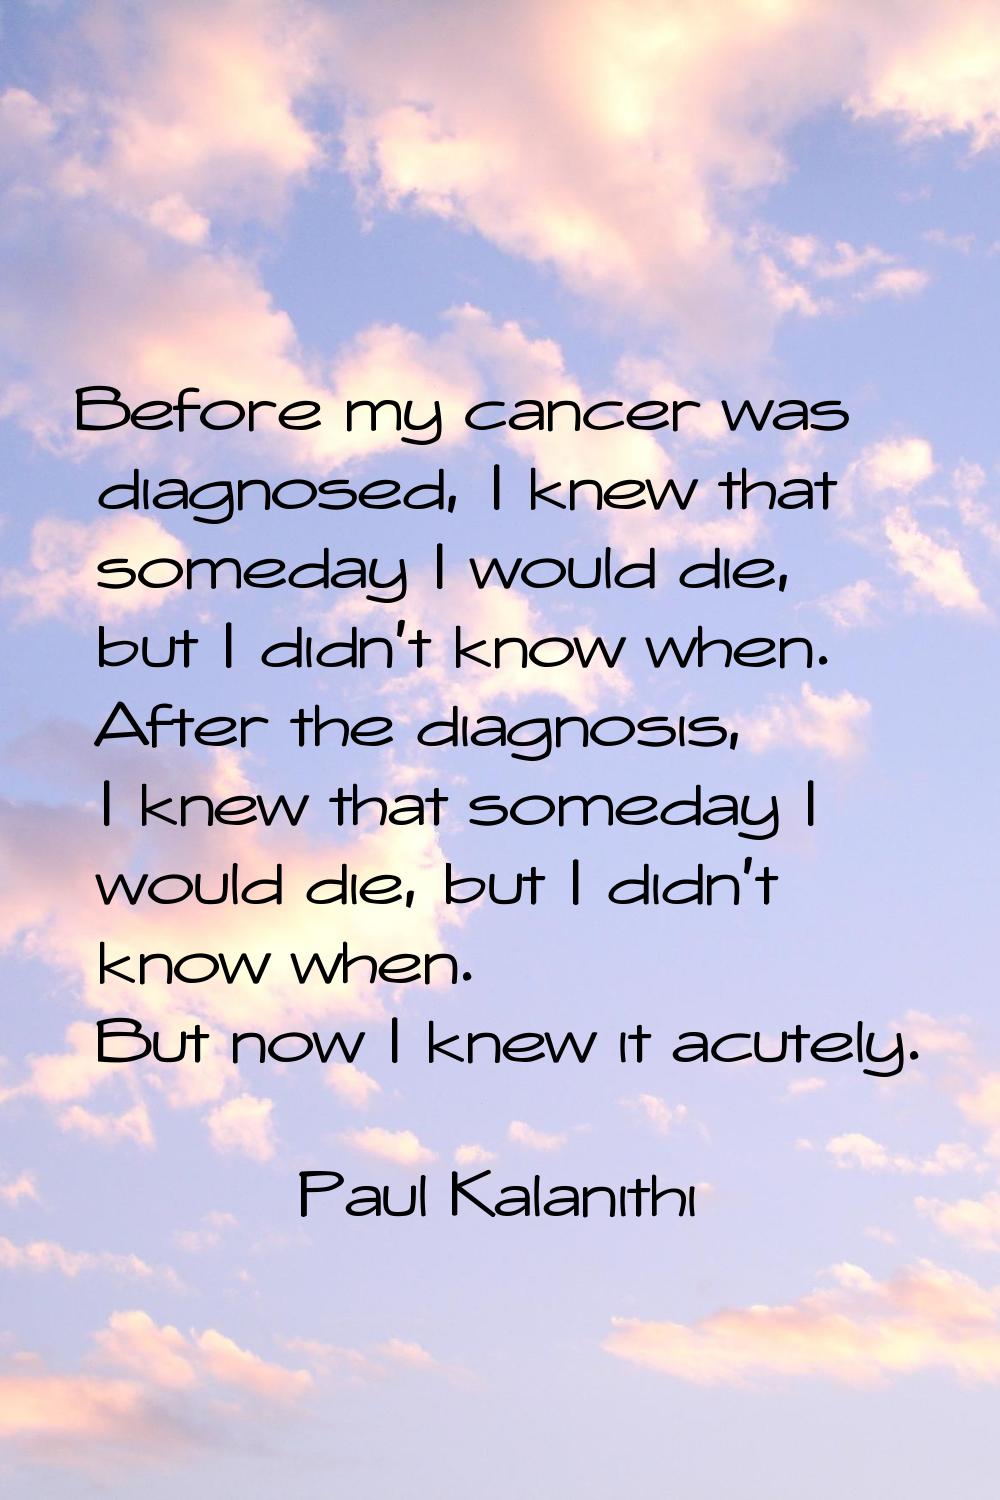 Before my cancer was diagnosed, I knew that someday I would die, but I didn't know when. After the 